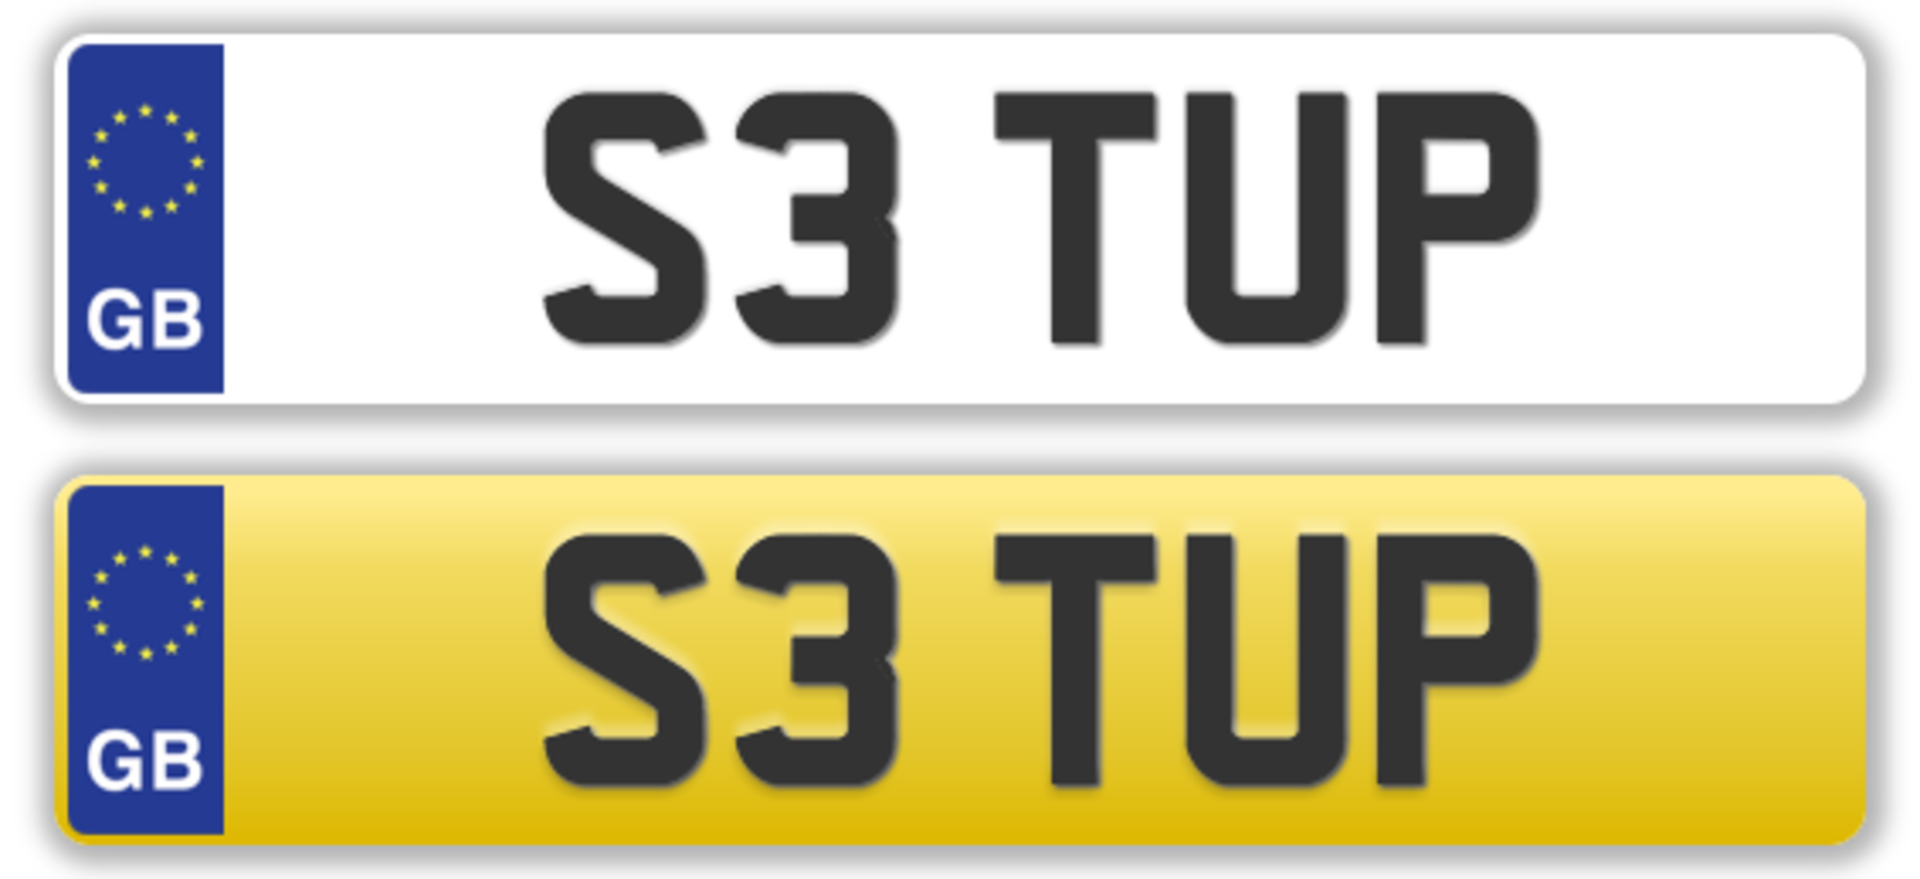 Cherished Plate - S3 TUP - No transfer fees. All registrations on retention and ready to transfer.